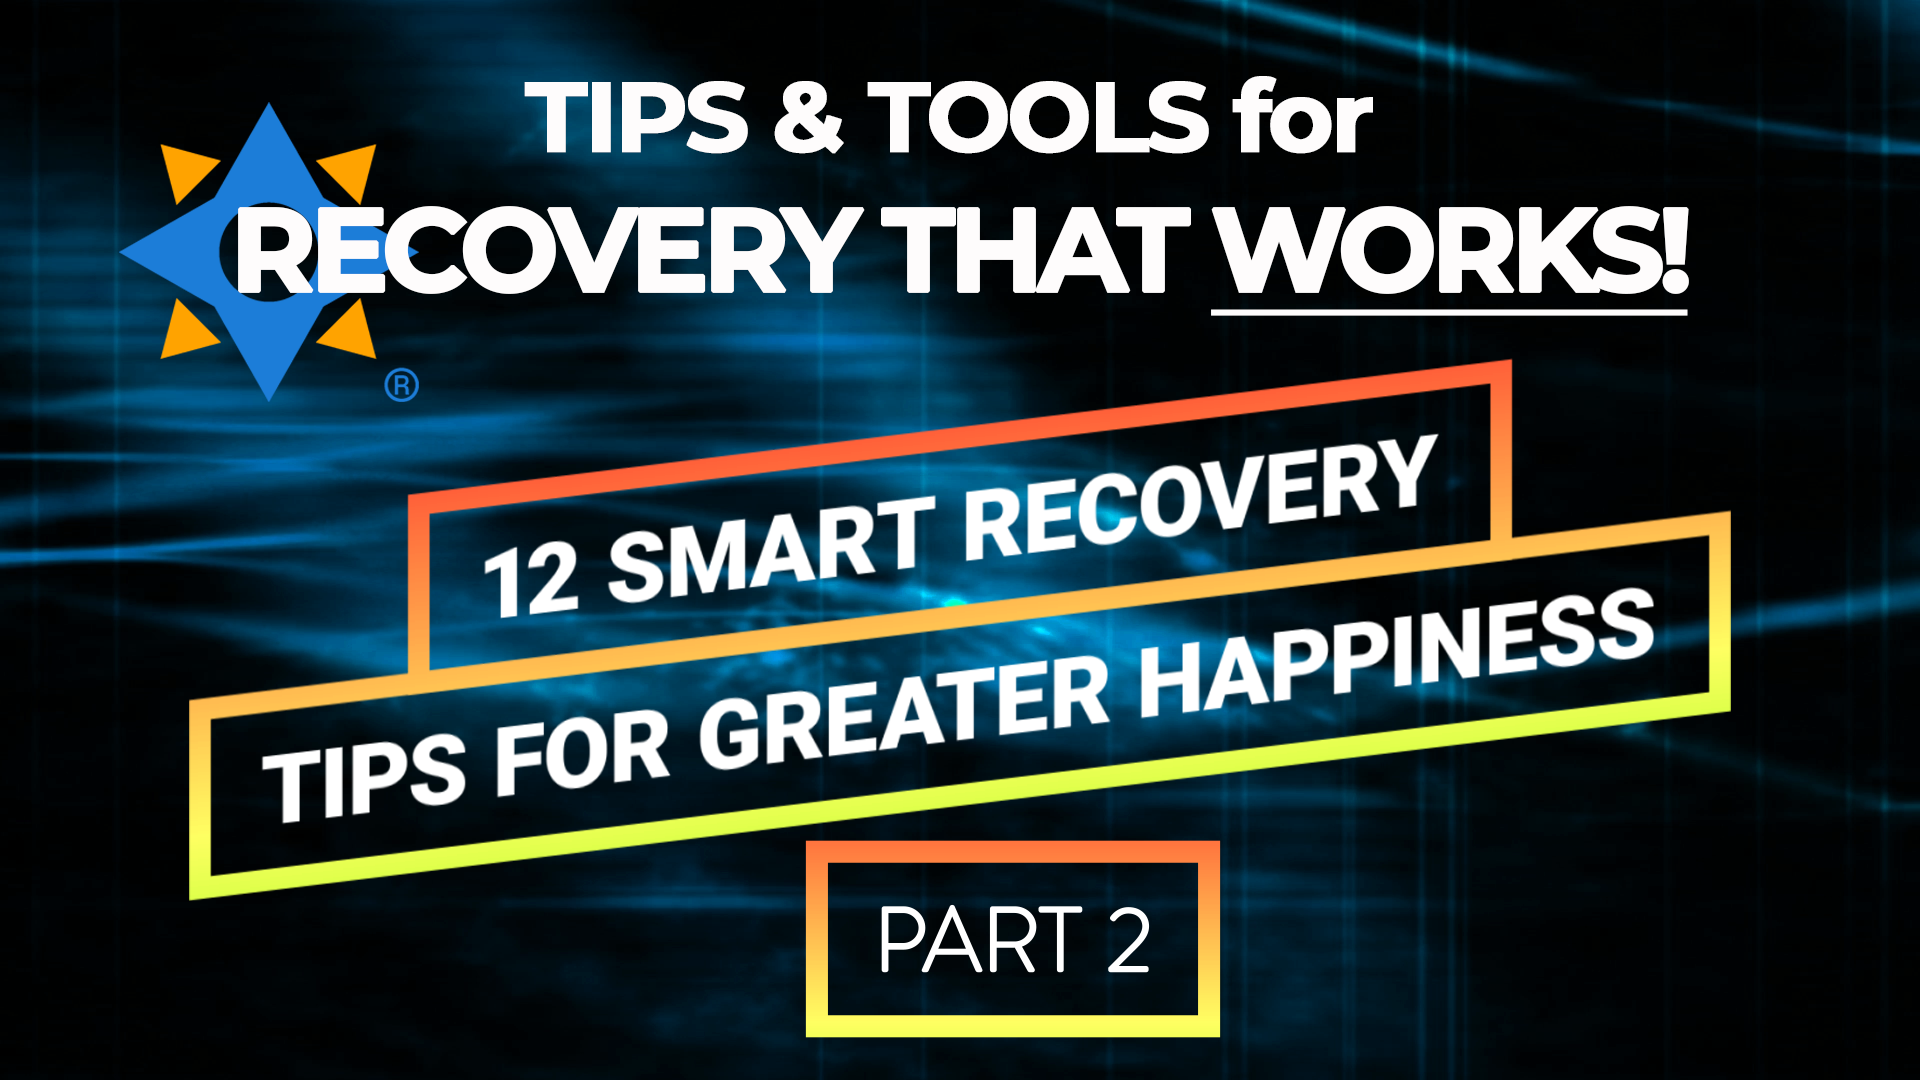 [Video] Keys to Happiness Part 2 – Tips & Tools for Recovery That Works!